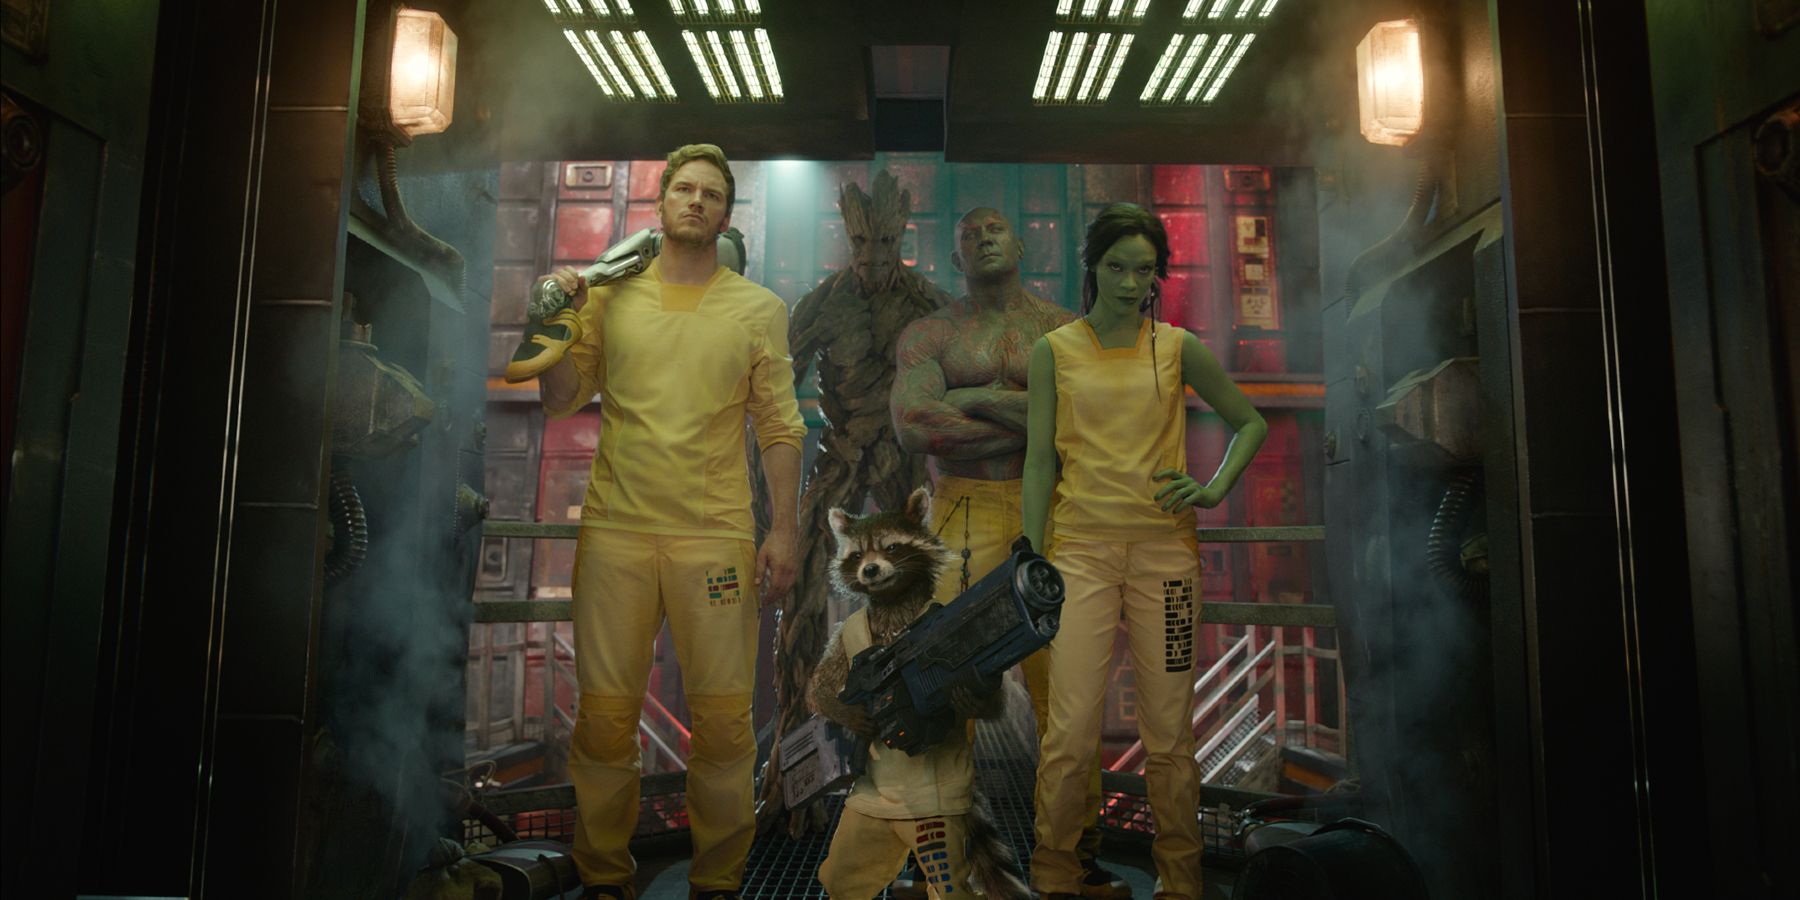 The Guardians entering the prison control room in Guardians Of The Galaxy